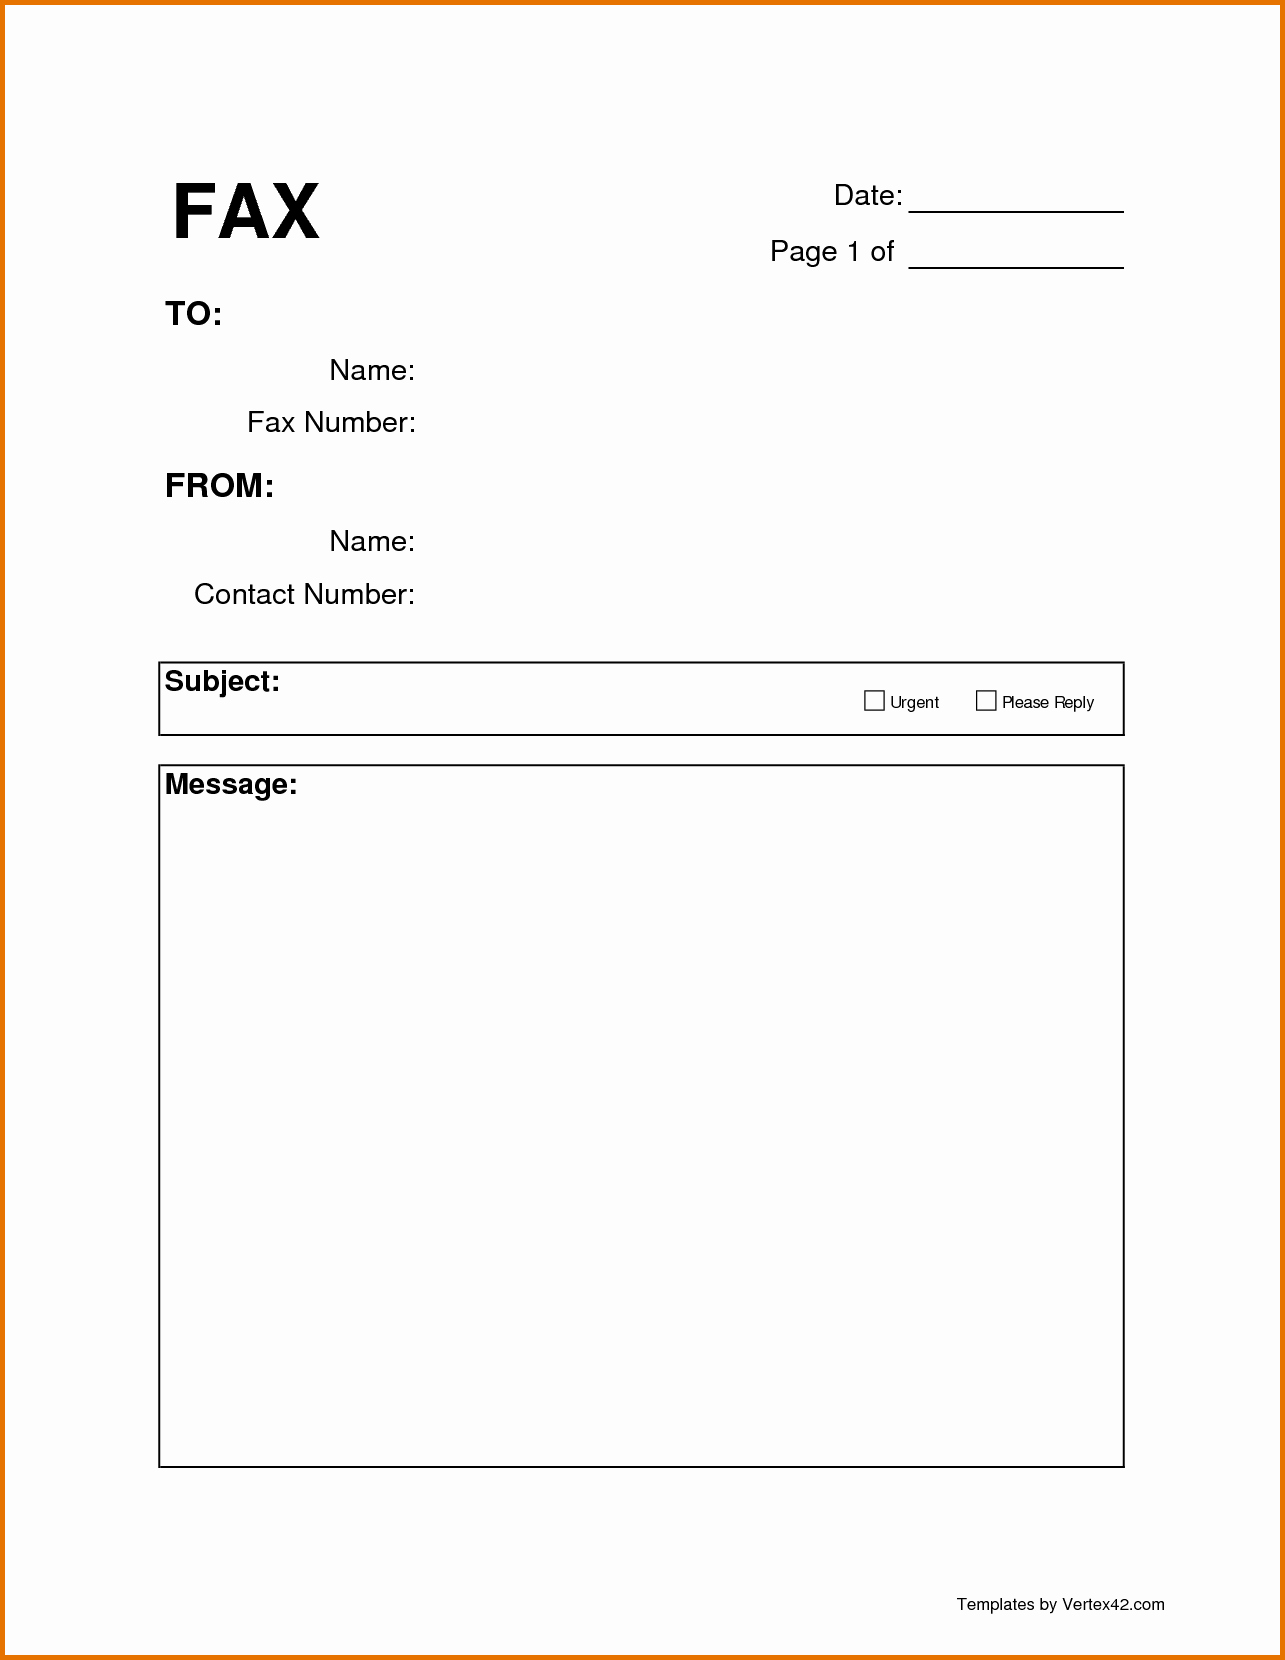 Free Fax Cover Sheets Template New 6 Blank Fax Cover Sheetreference Letters Words